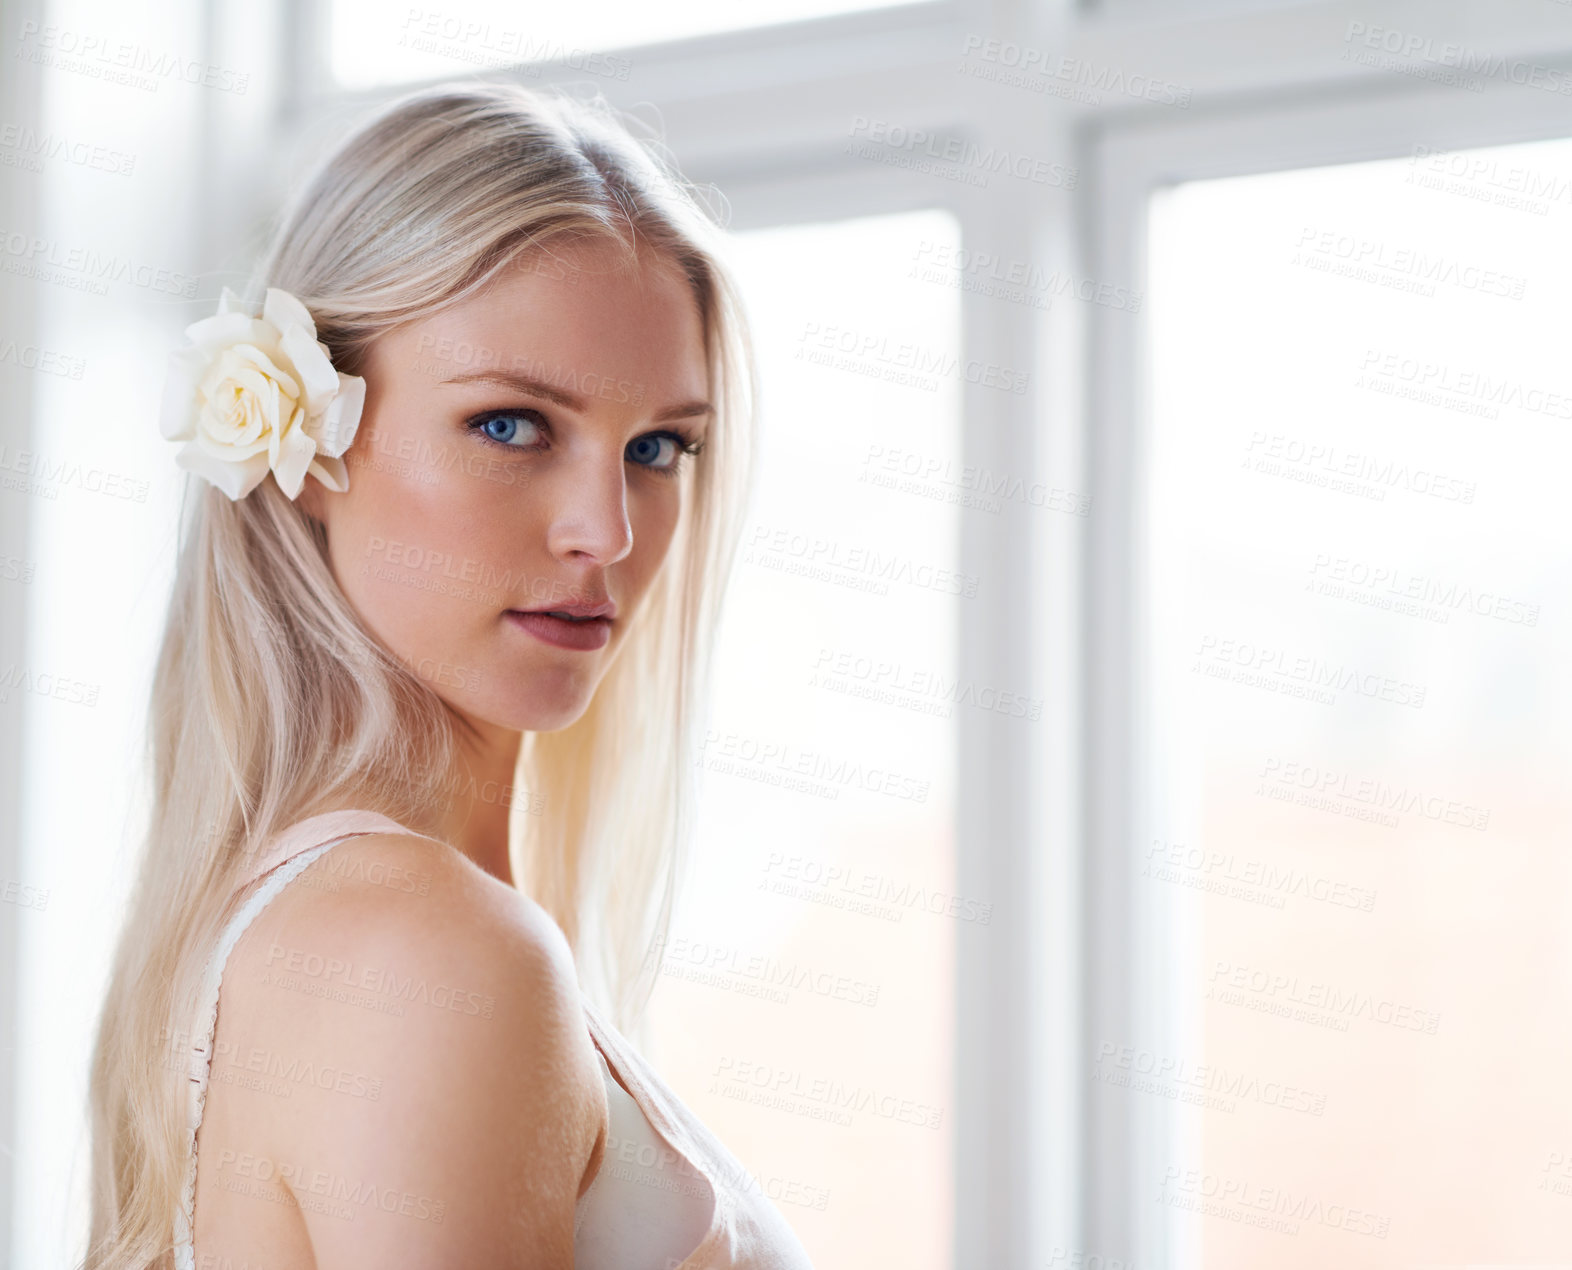 Buy stock photo Portrait of an attractive woman with a white rose in her hair while standing in her bedroom